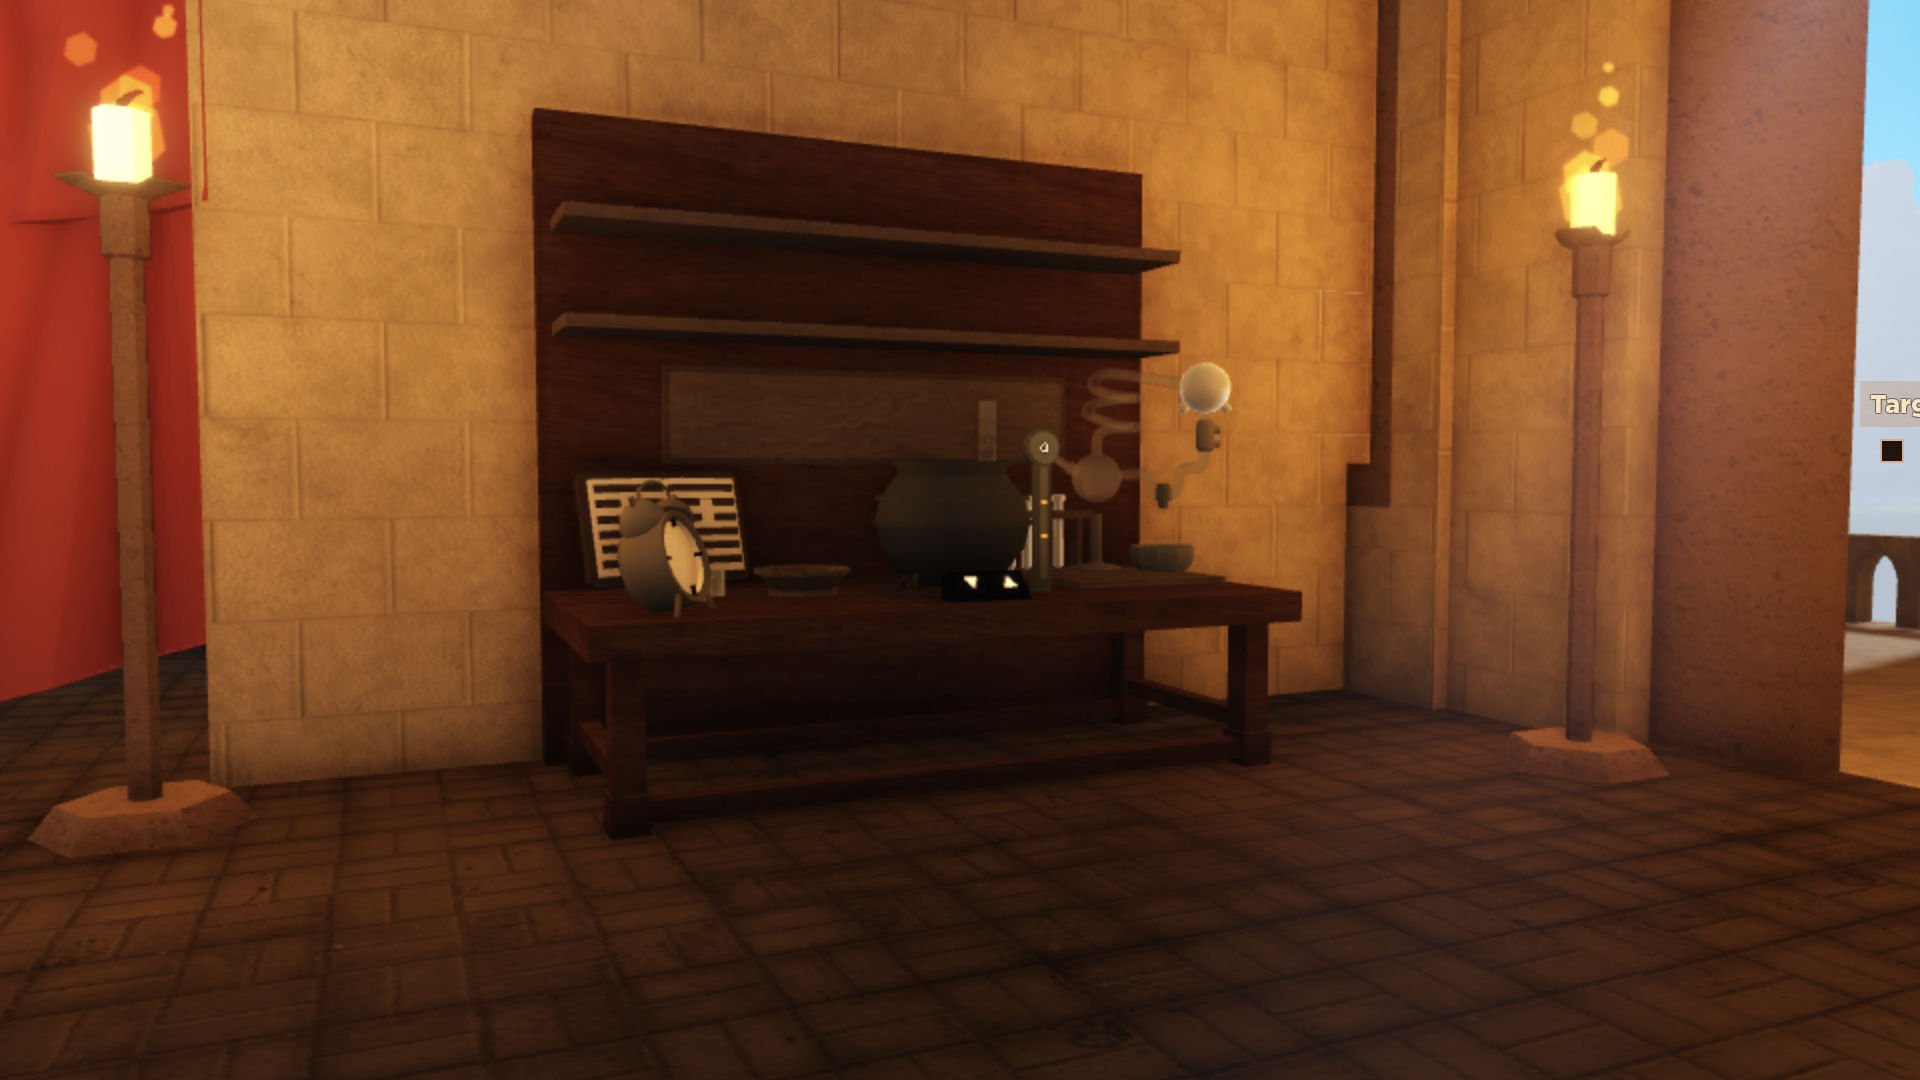 The potion brewing desk in Ro-Wizard.